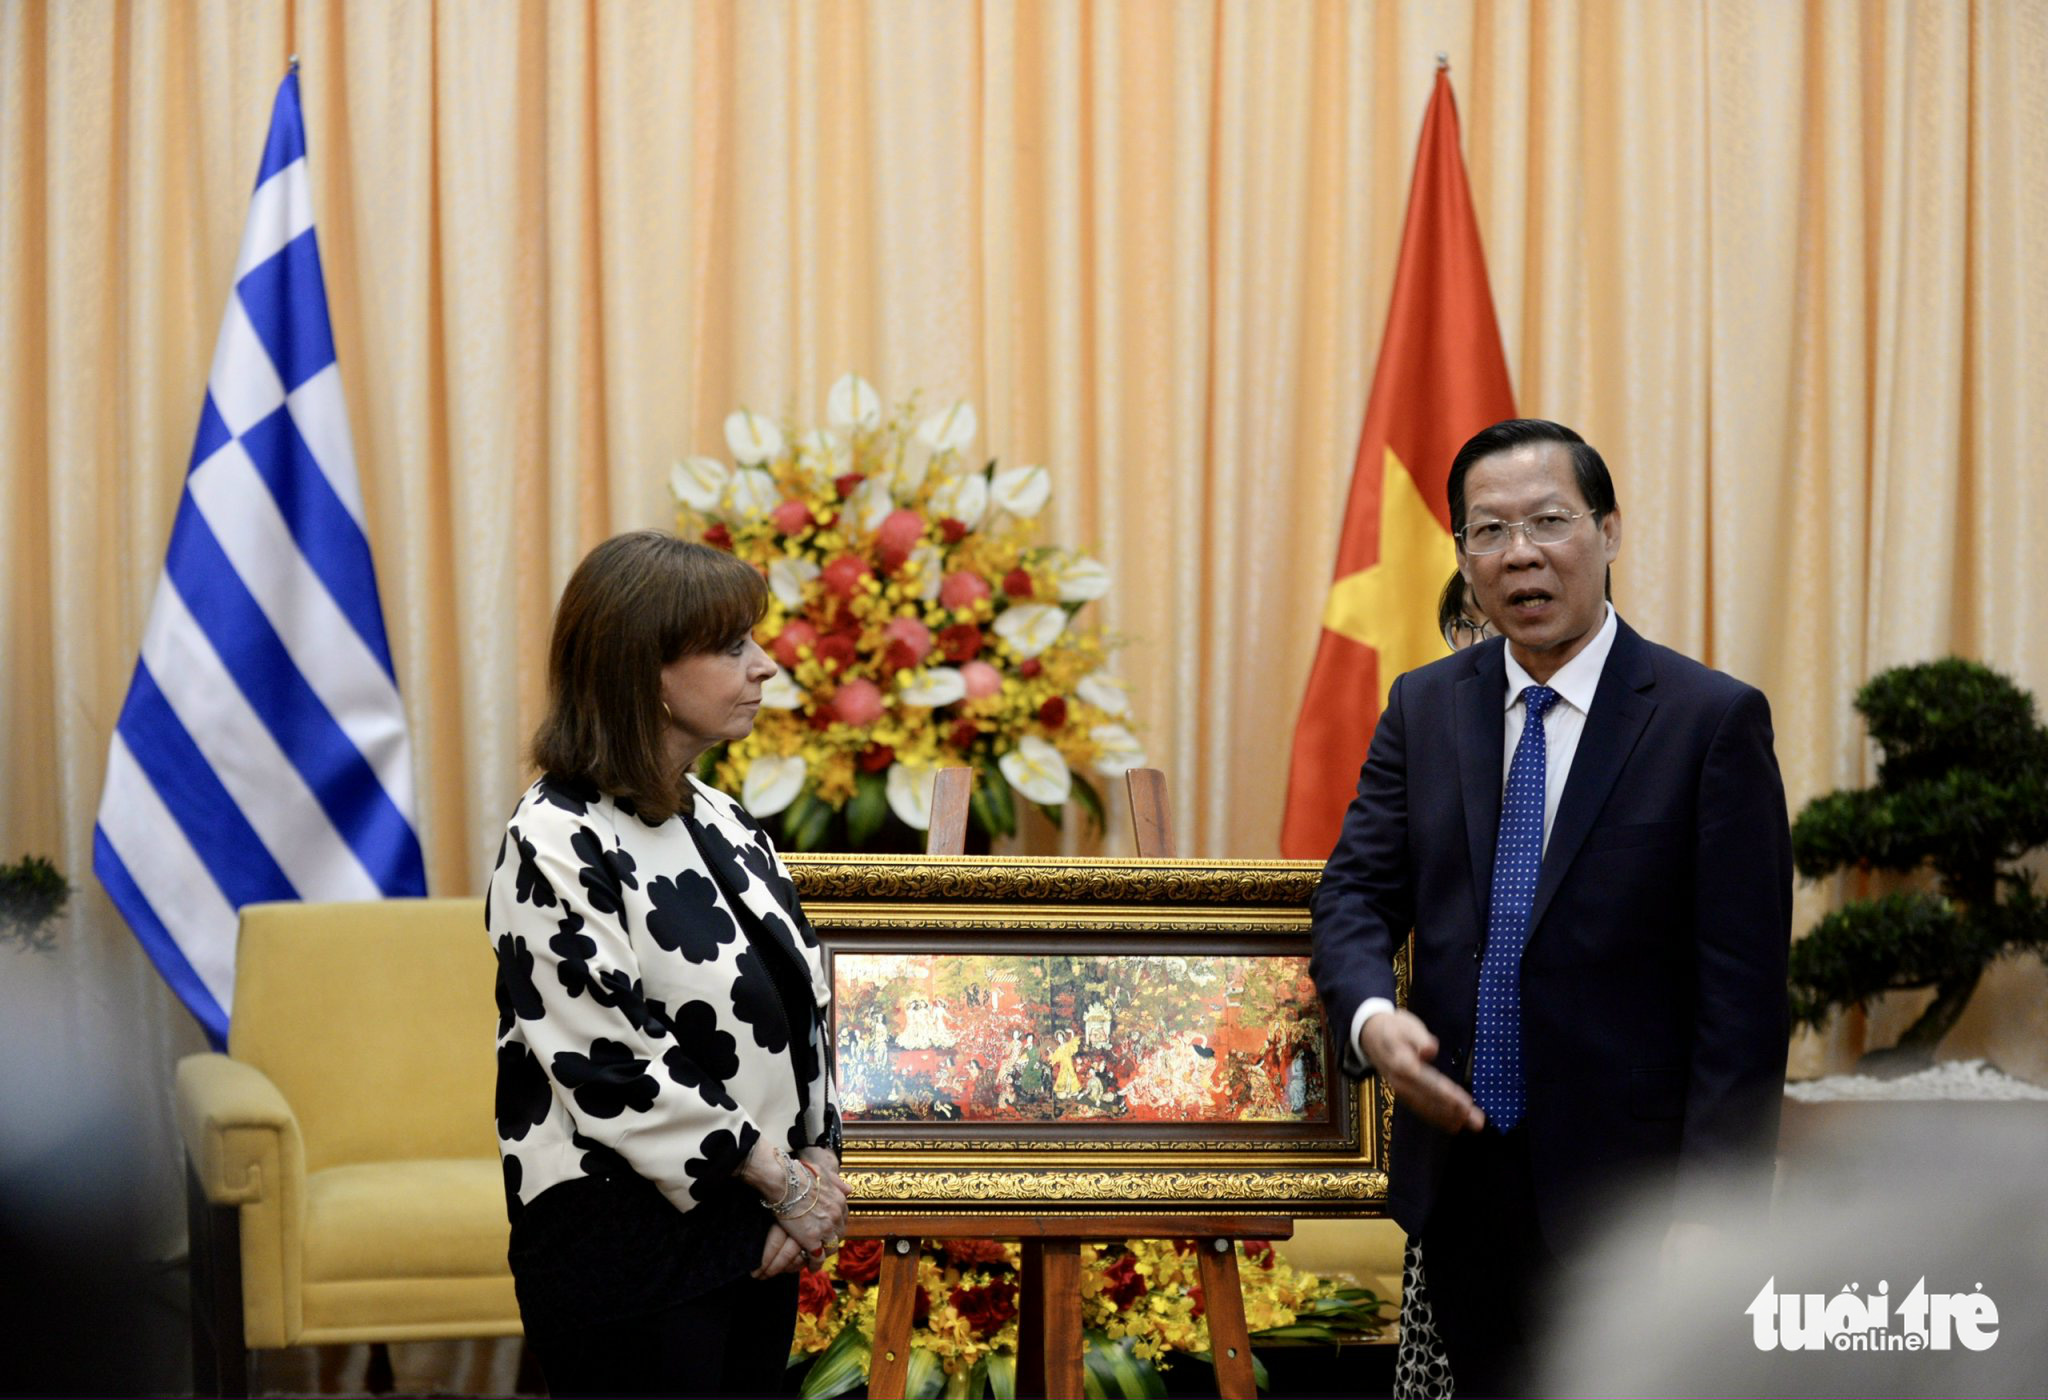 Ho Chi Minh City chairman Phan Van Mai presents a gift to Greek President Katerina Sakellaropoulou following their talks in Ho Chi Minh City, May 18, 2022. Photo: T.T.D. / Tuoi Tre